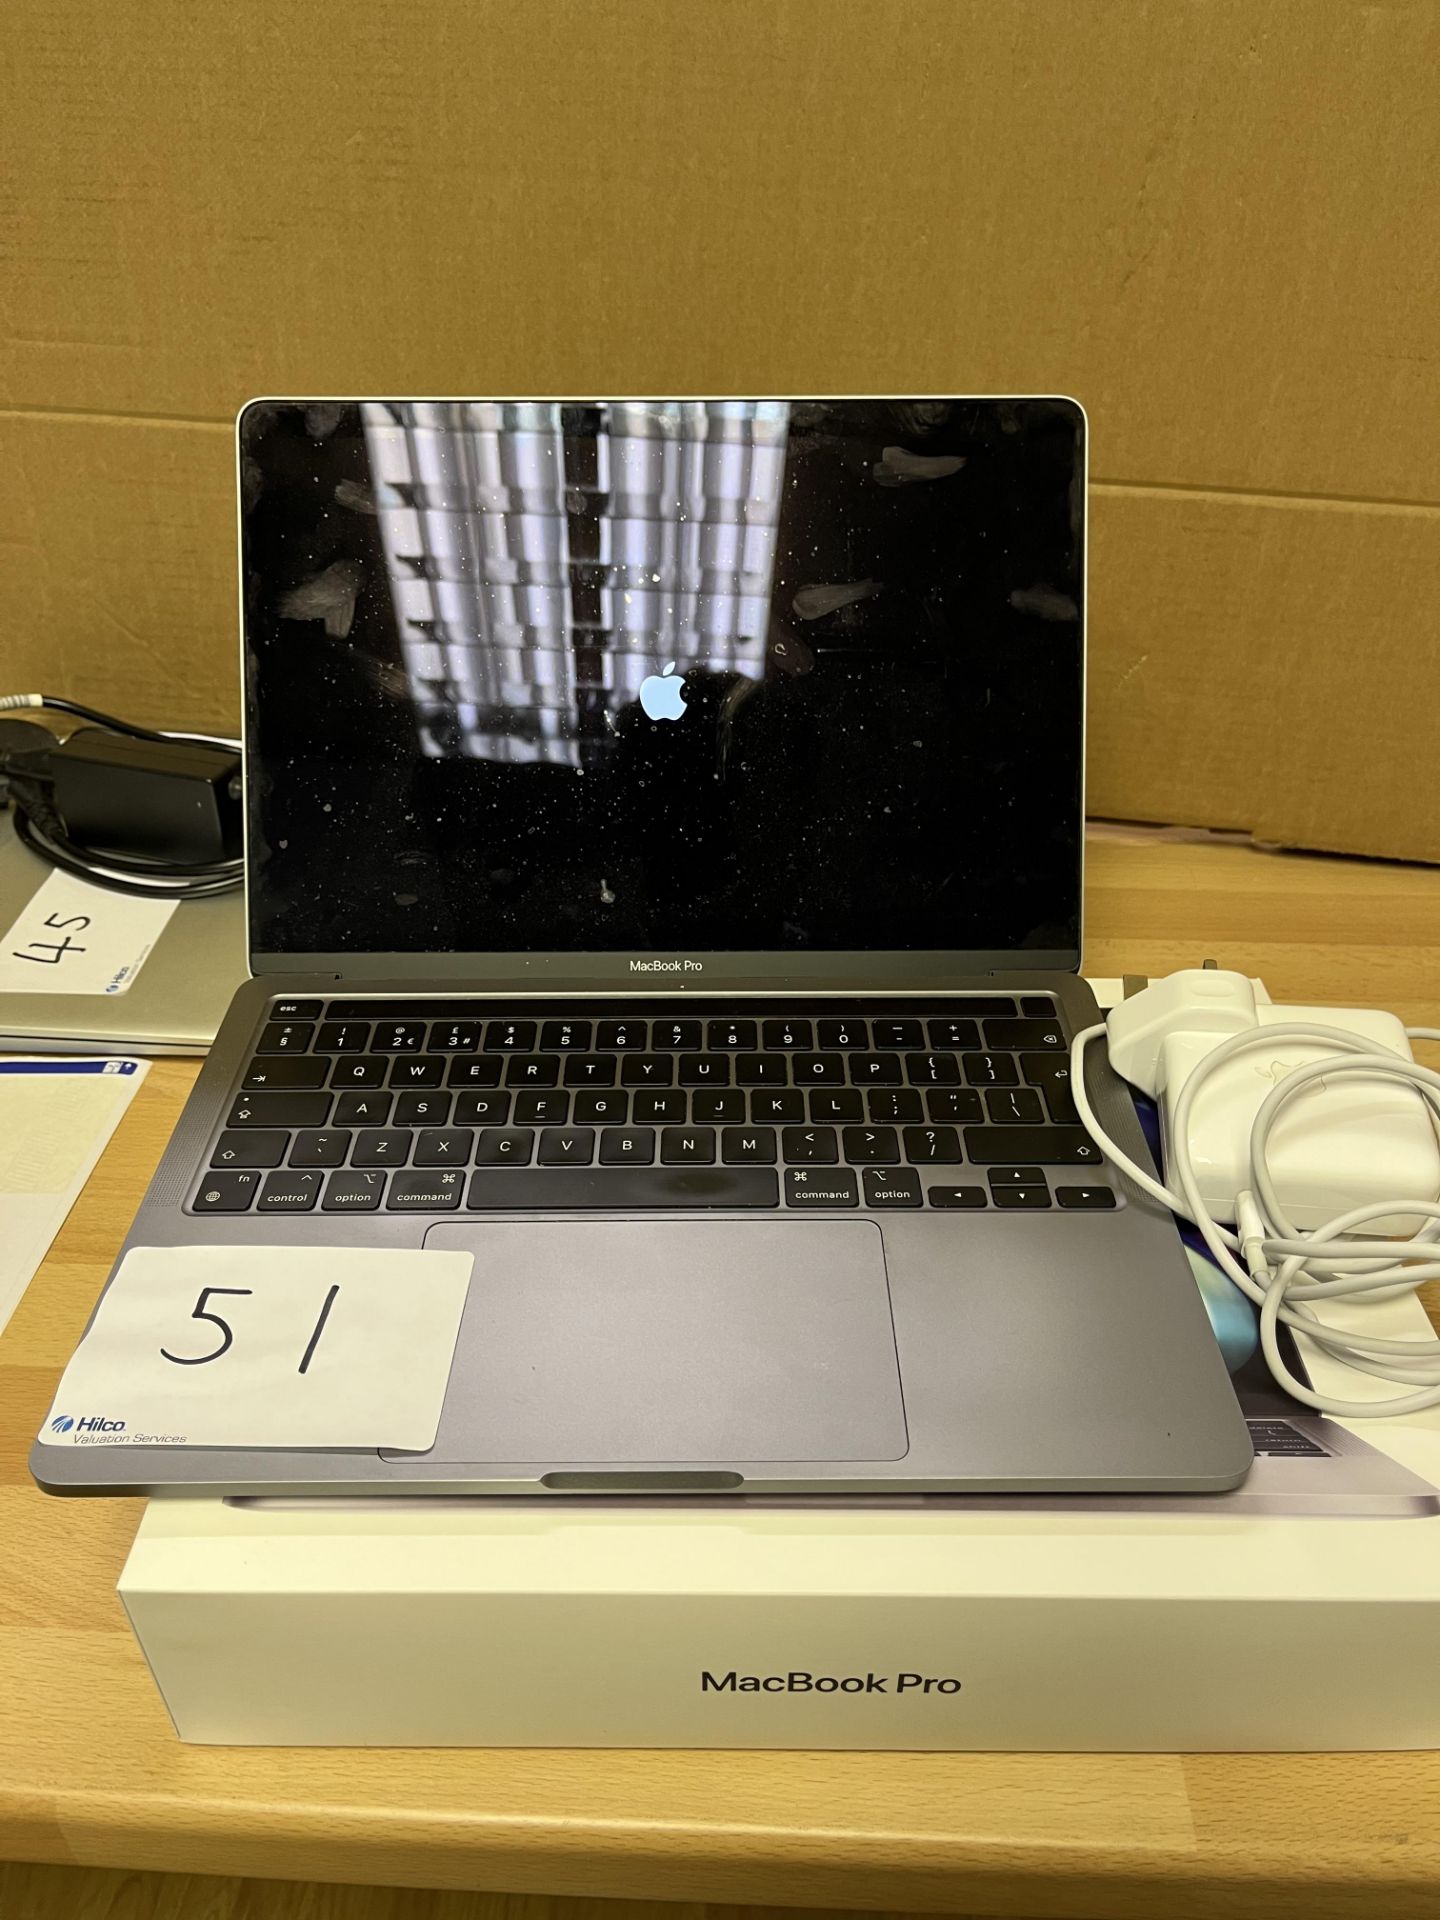 MacBook Pro (13-inch, M1, 2020) 8GB Memory With charger and box Serial Number FVFFGS22Q05D - Image 2 of 3